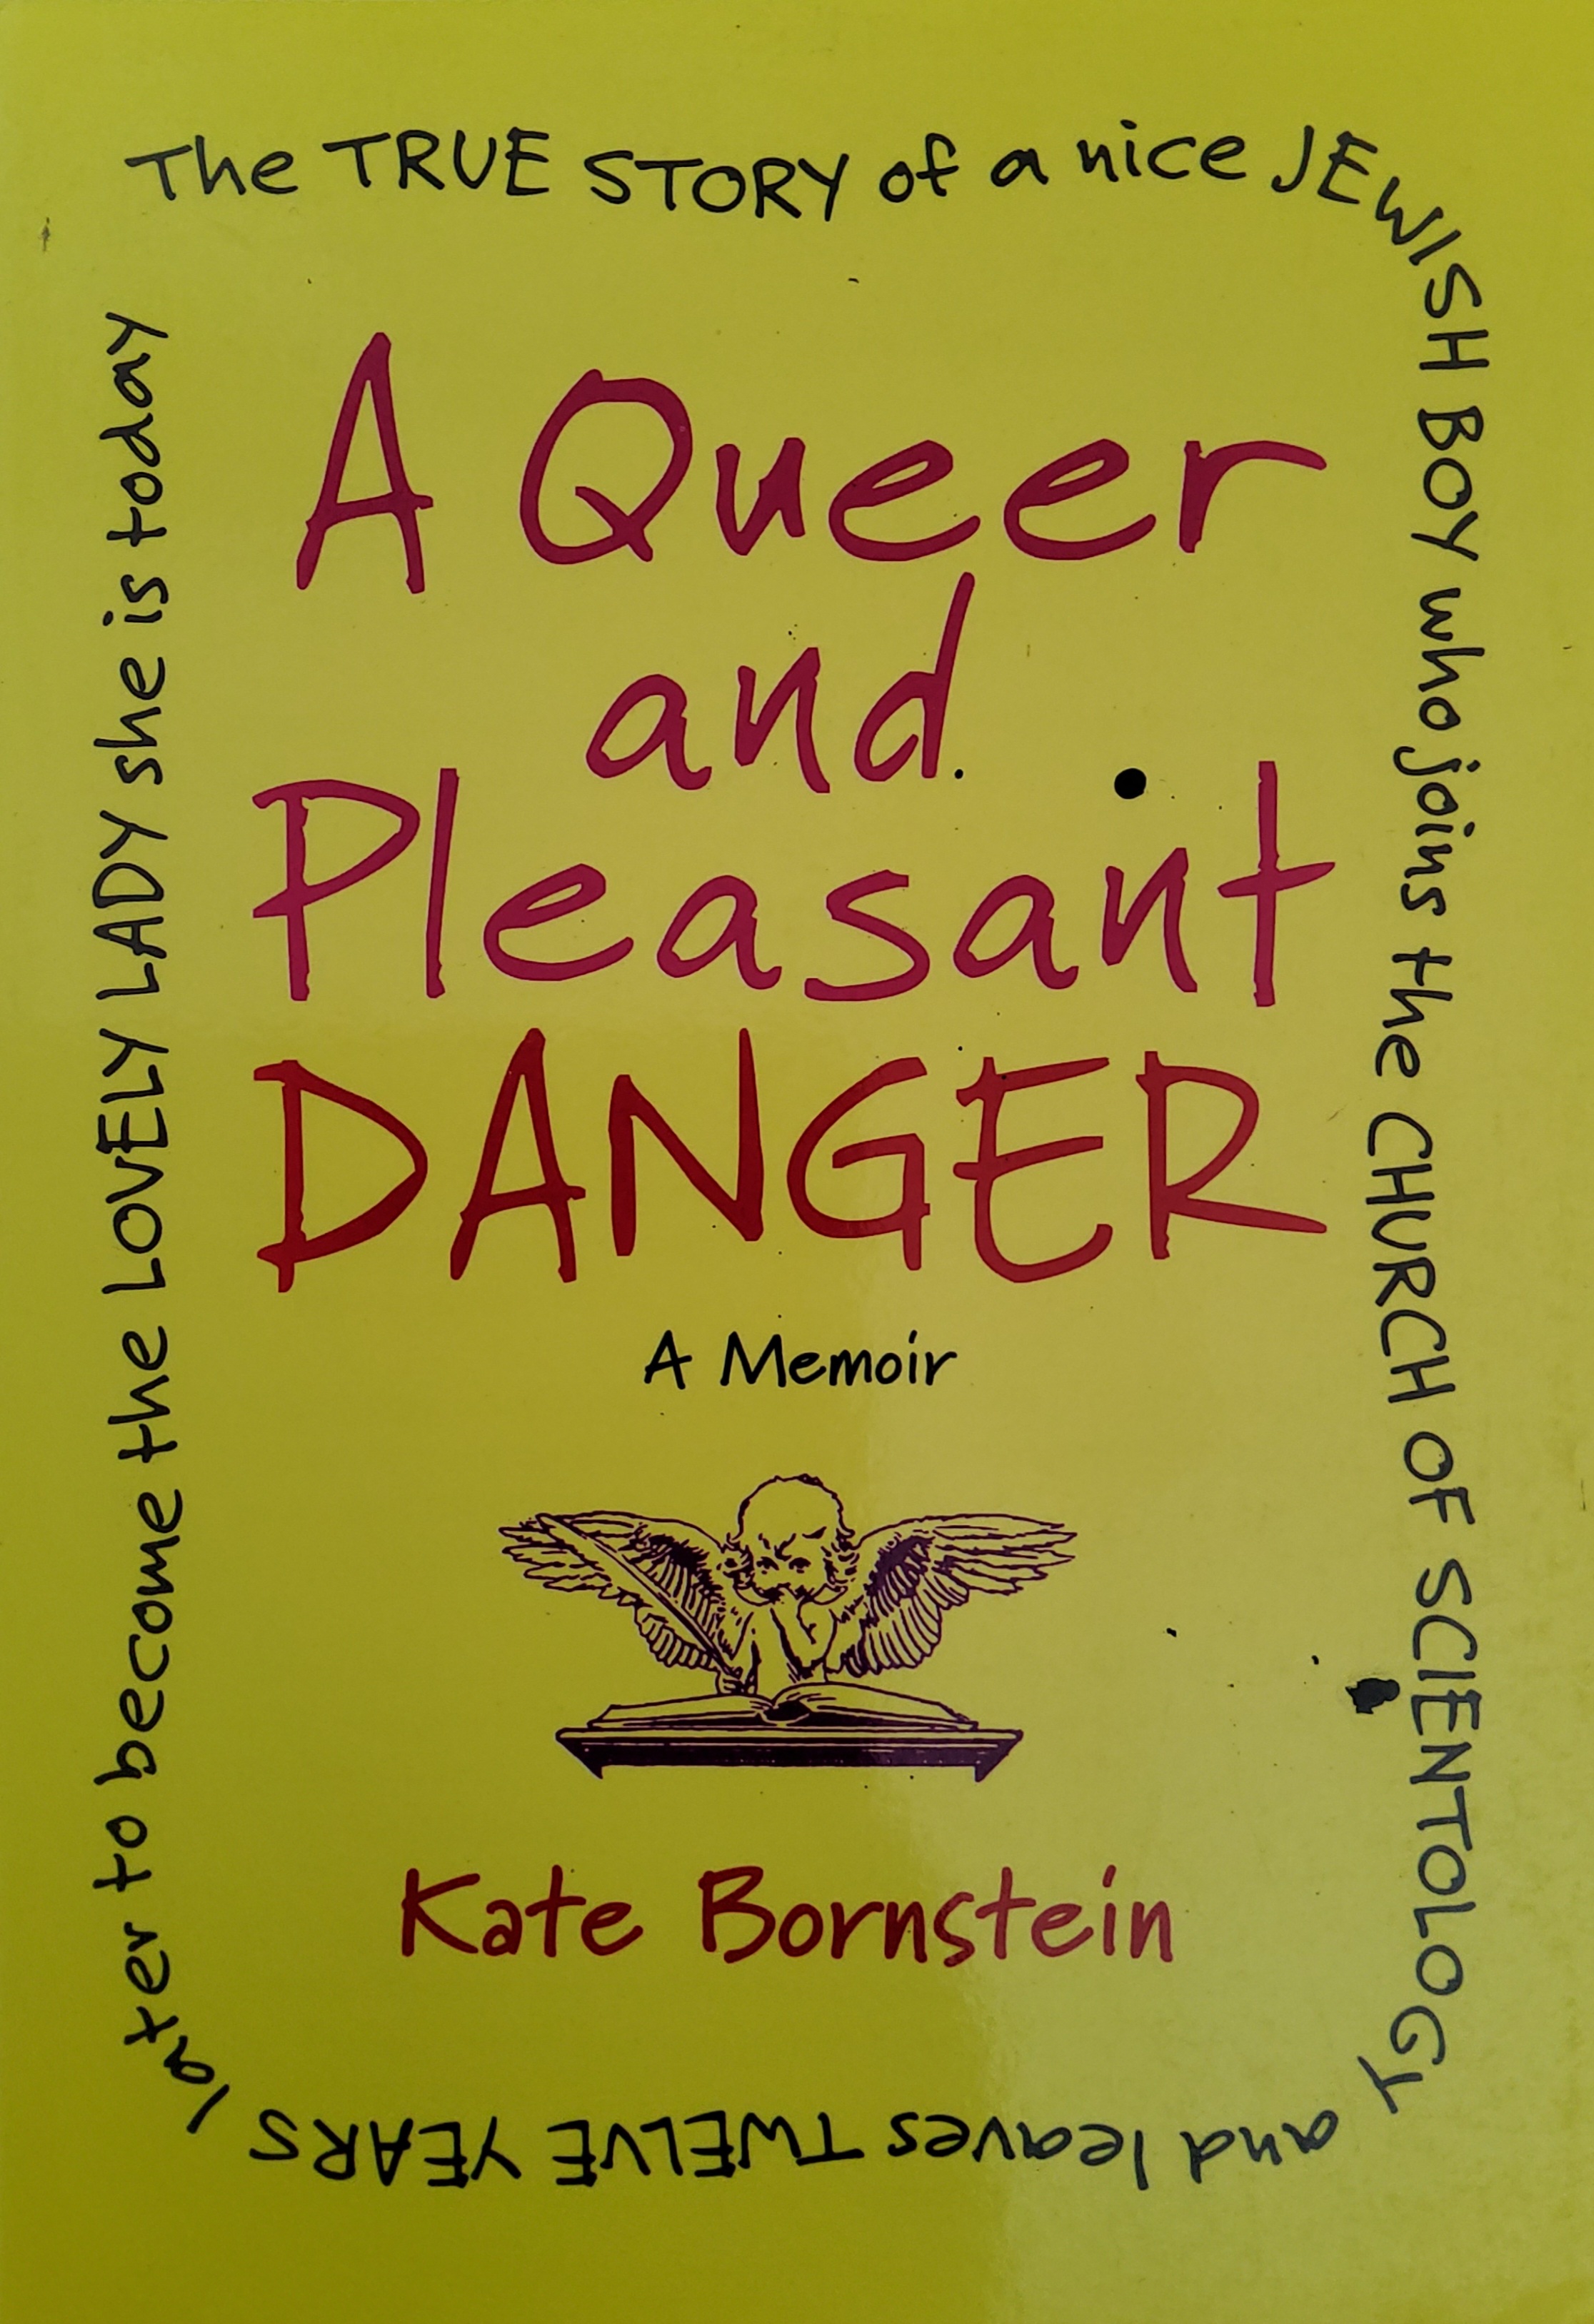 a-queer-and-pleasant-danger-kate-bornstein-gender-community-lending-library